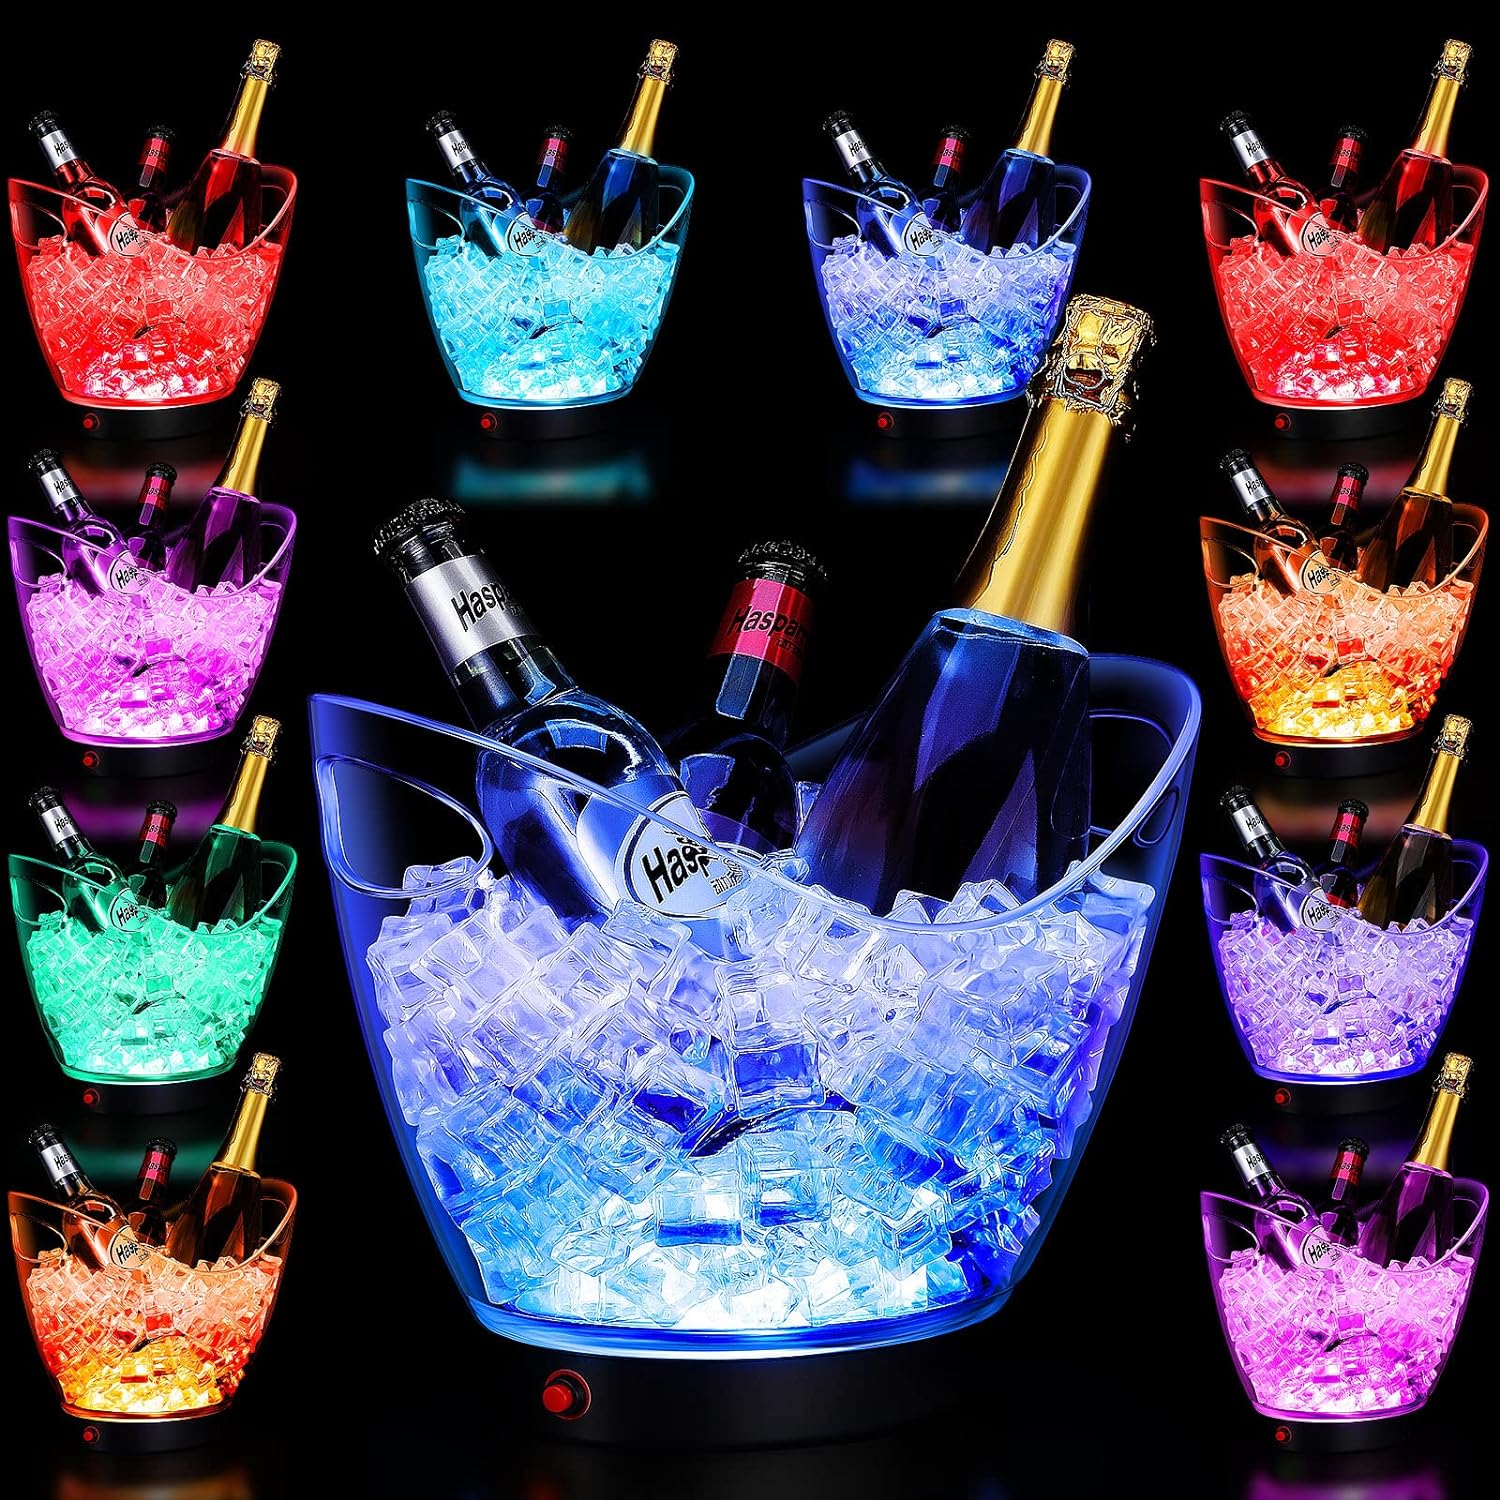 Umigy 10 Pieces LED Ice Buckets 2L Clear Plastic Beer Buckets LED Light Beer Buckets RGB Colors Changing Cooler Bucket Plastic Ice Bucket with Stand Ice Container for Party Home Bar KTV Clubs